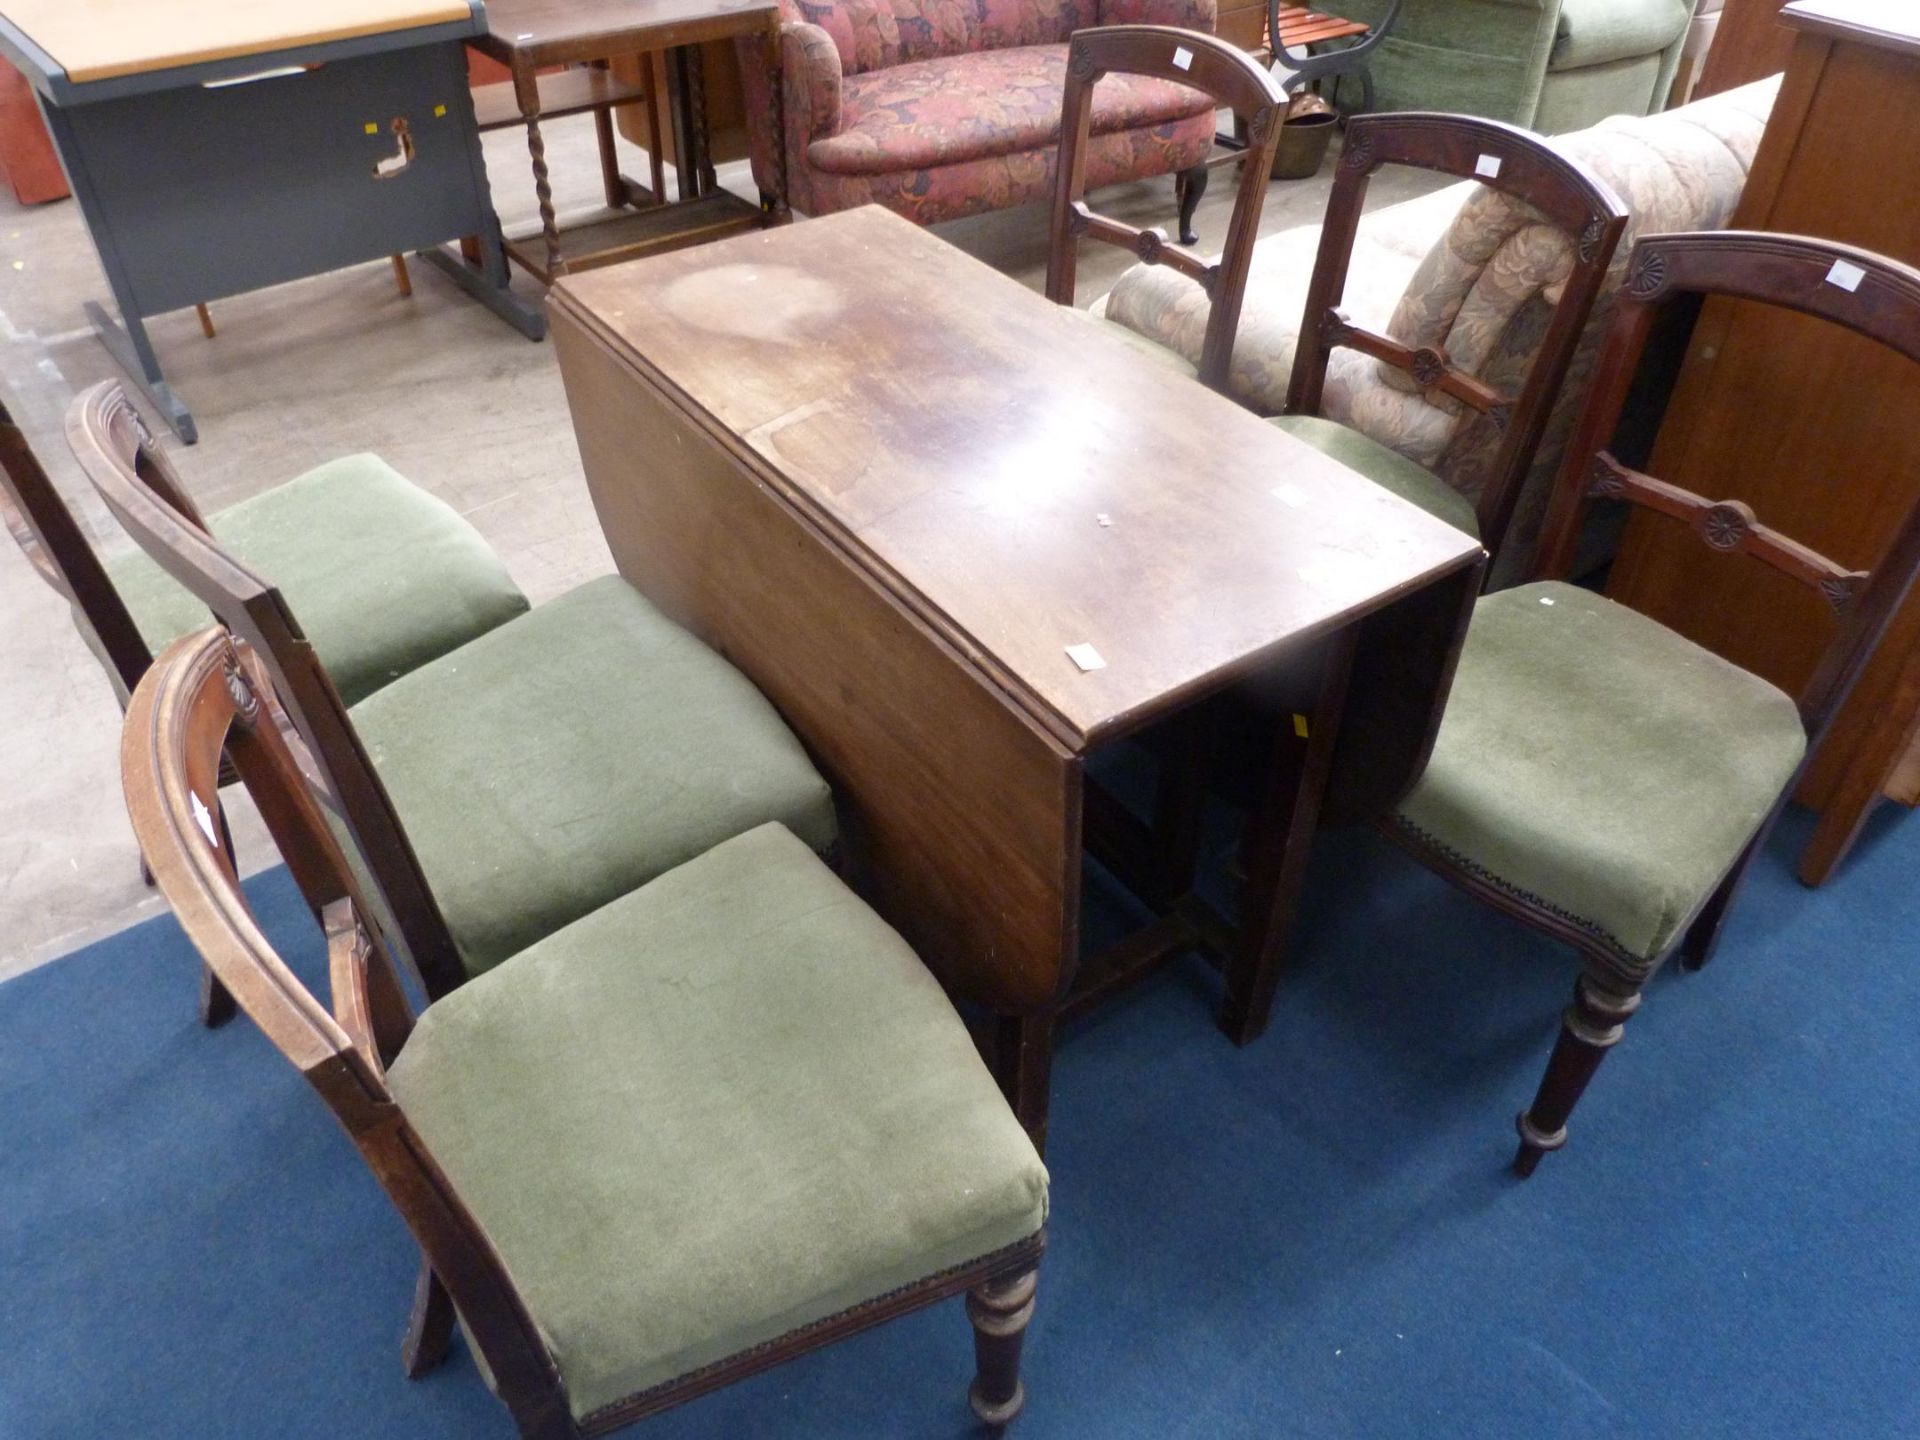 A Drop Leaf Gate Leg Dining Table (H76cm, W98.5cm, D48cm (Closed) 144cm (Open)) together with Six